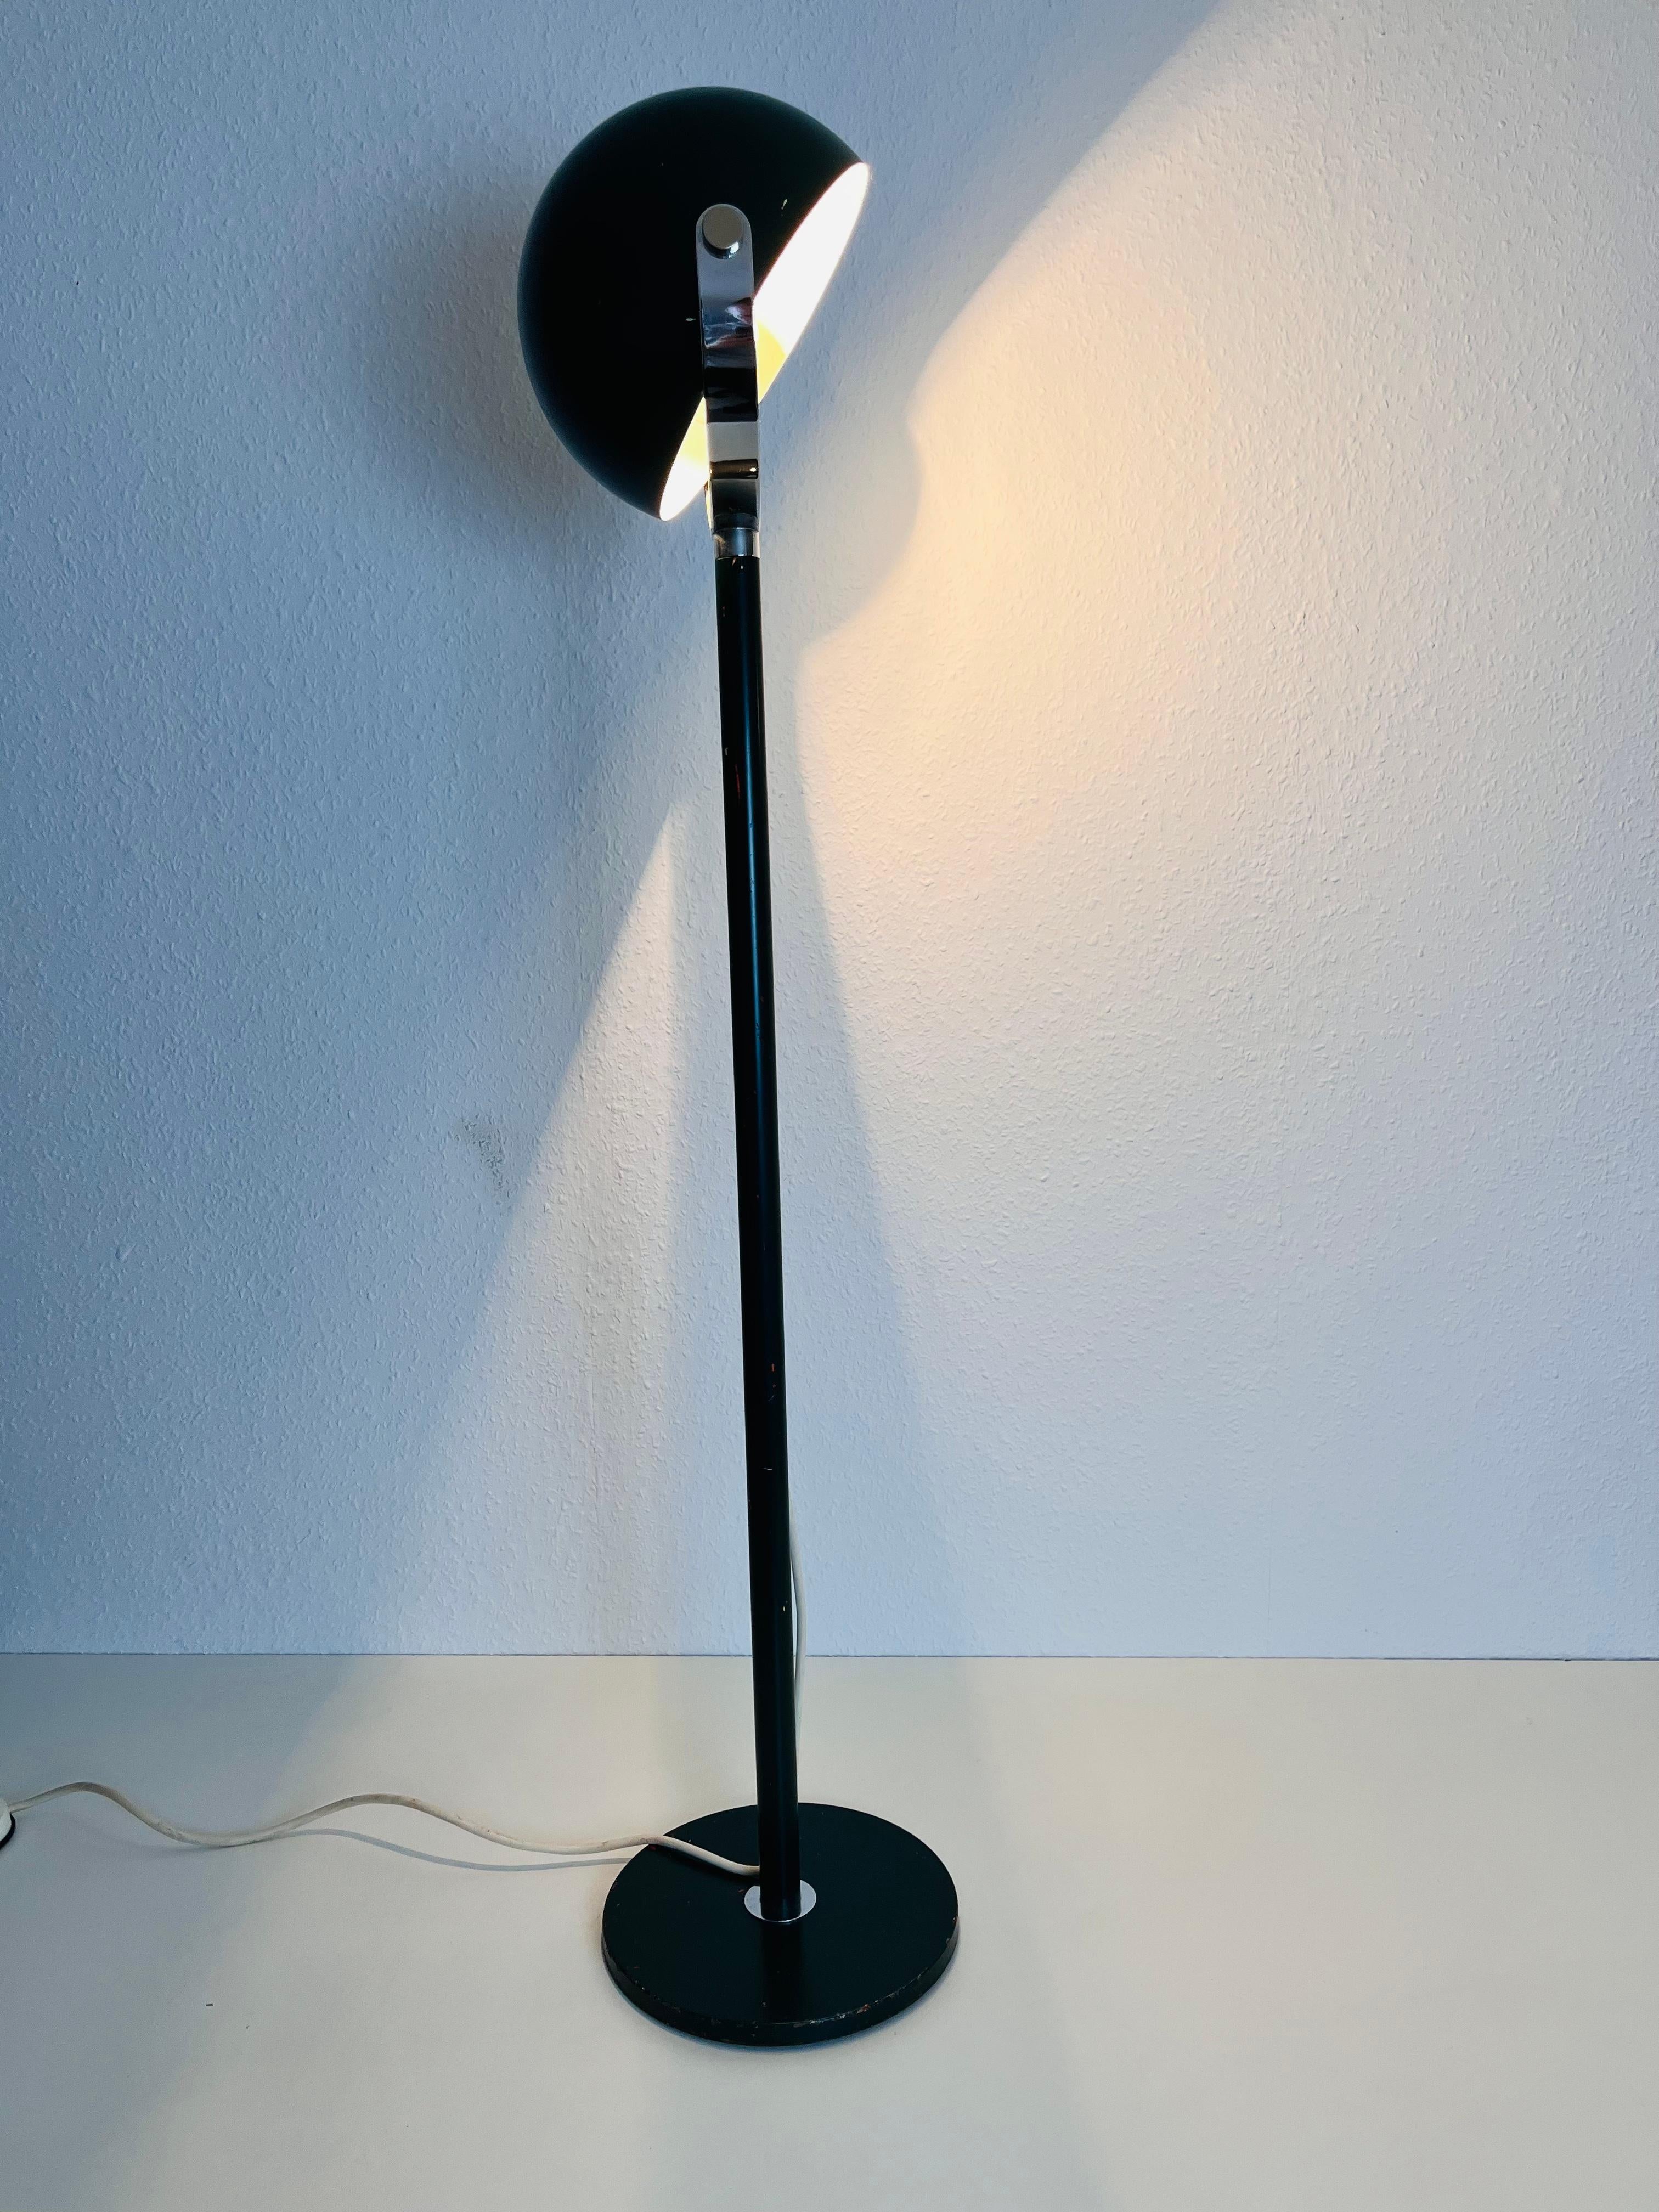 Midcentury Green Space Age Floor Lamp, Germany, 1960s For Sale 1